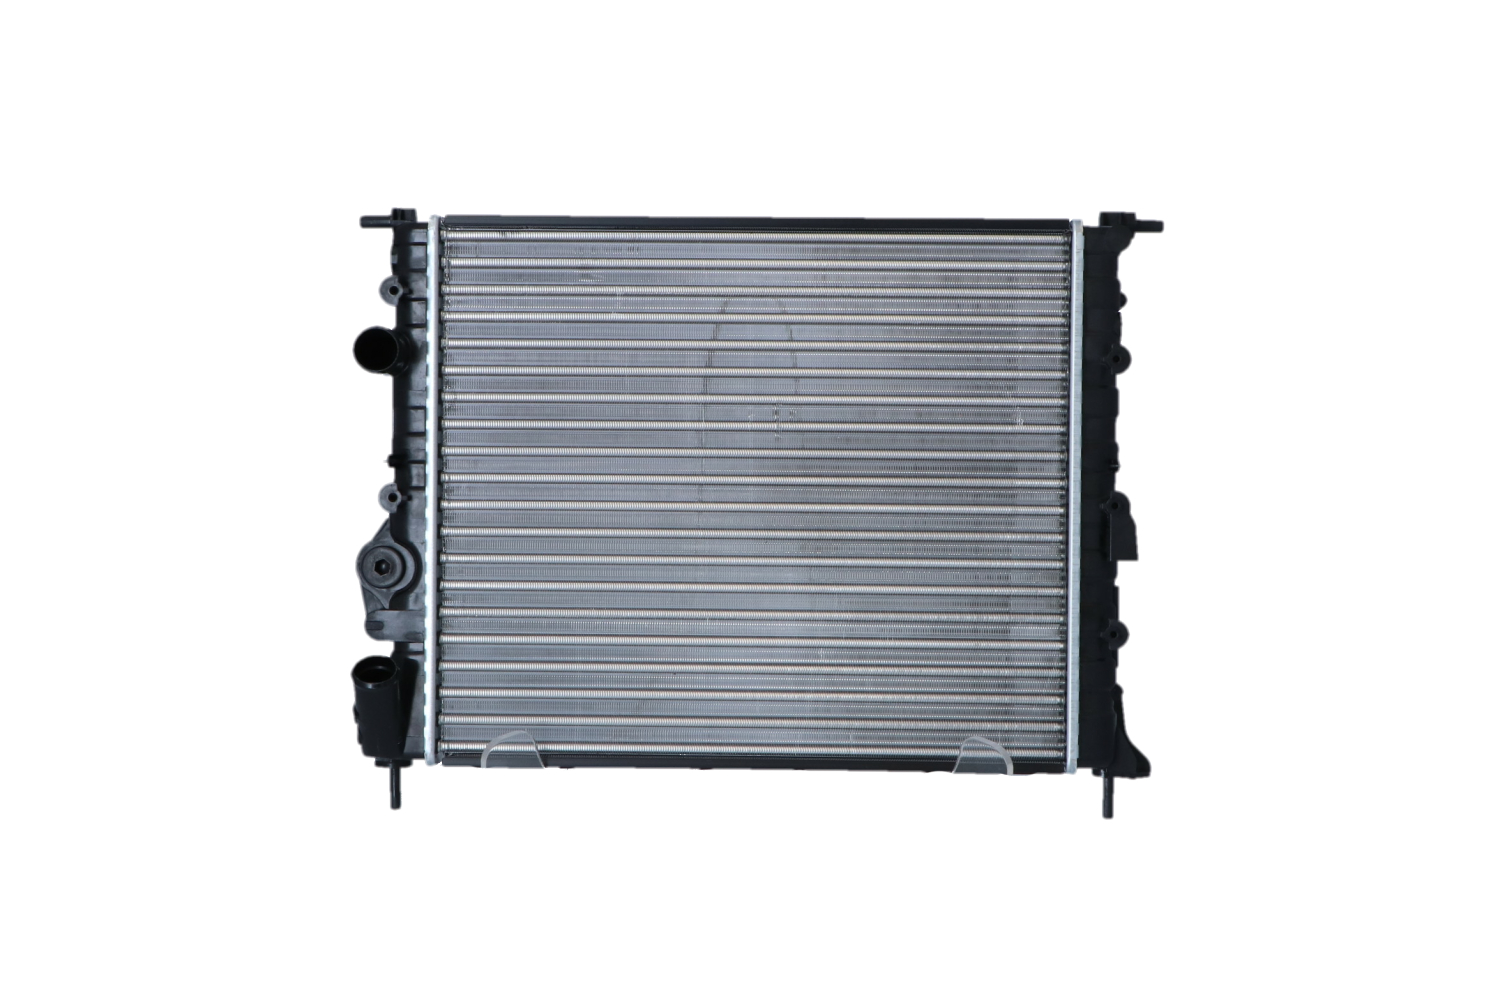 NRF 58023 Engine radiator Aluminium, 430 x 378 x 23 mm, Mechanically jointed cooling fins